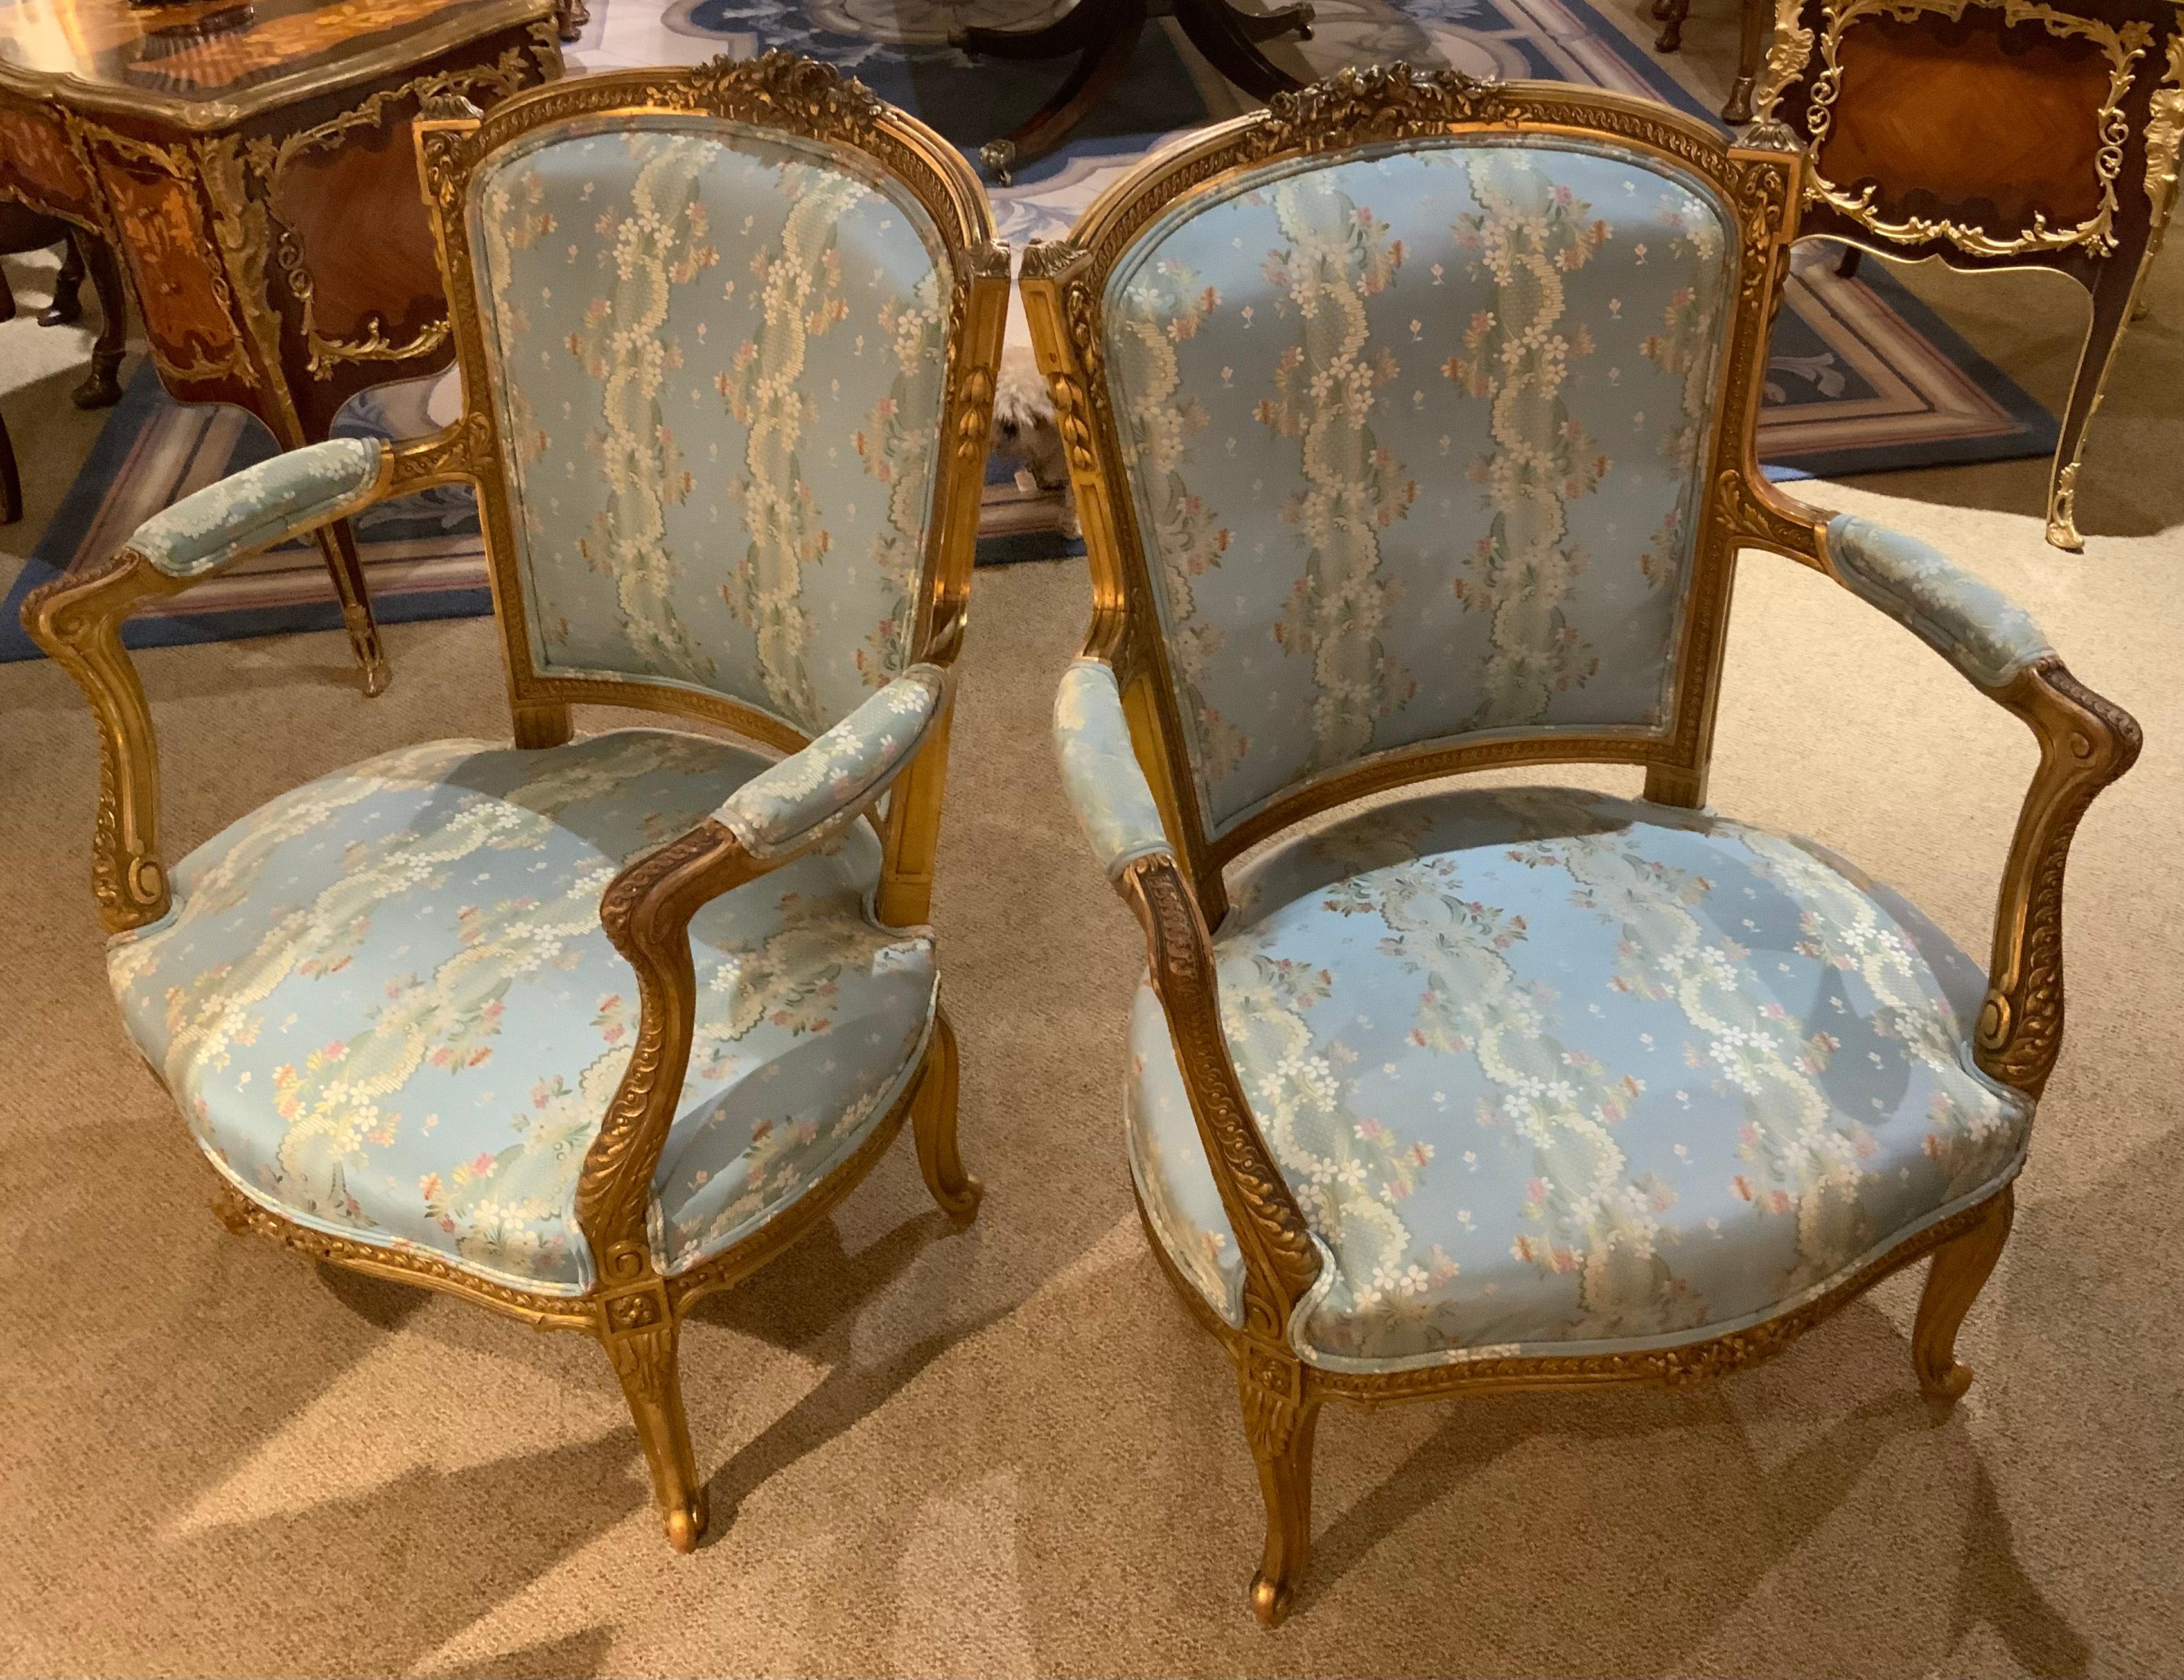 The carving and detail work is fine and the quality of the gilding
Is excellent. The shape is appealing because the back is gracefully 
Curved and makes these chairs comfortable. The upholstery is
Clean and has no spots. The legs are curved in